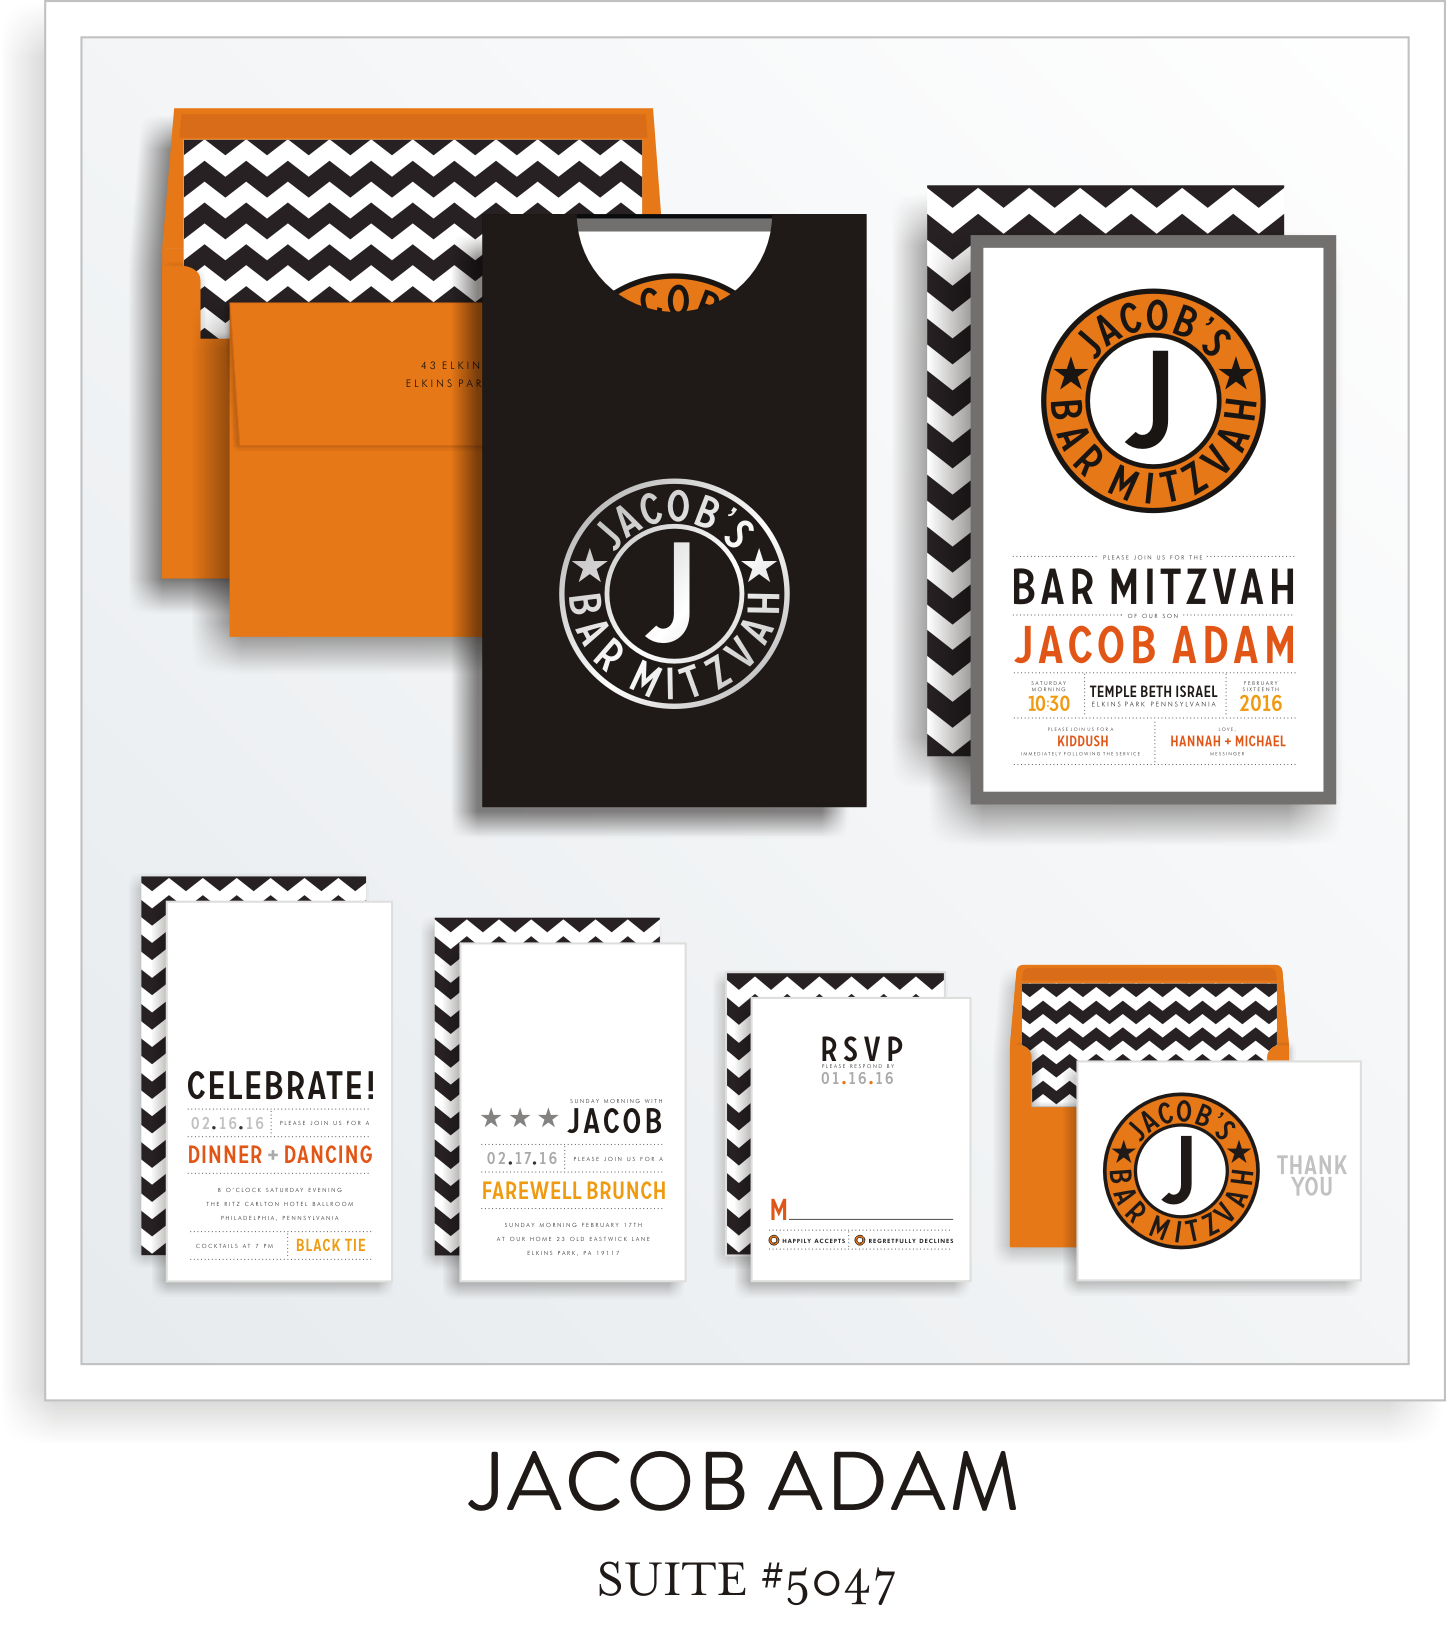 Copy of <a href=/bar-mitzvah-invitations-5047>Suite Details→</a><strong><a href=/jacob-adam-in-colors>see more colors→</a></strong>